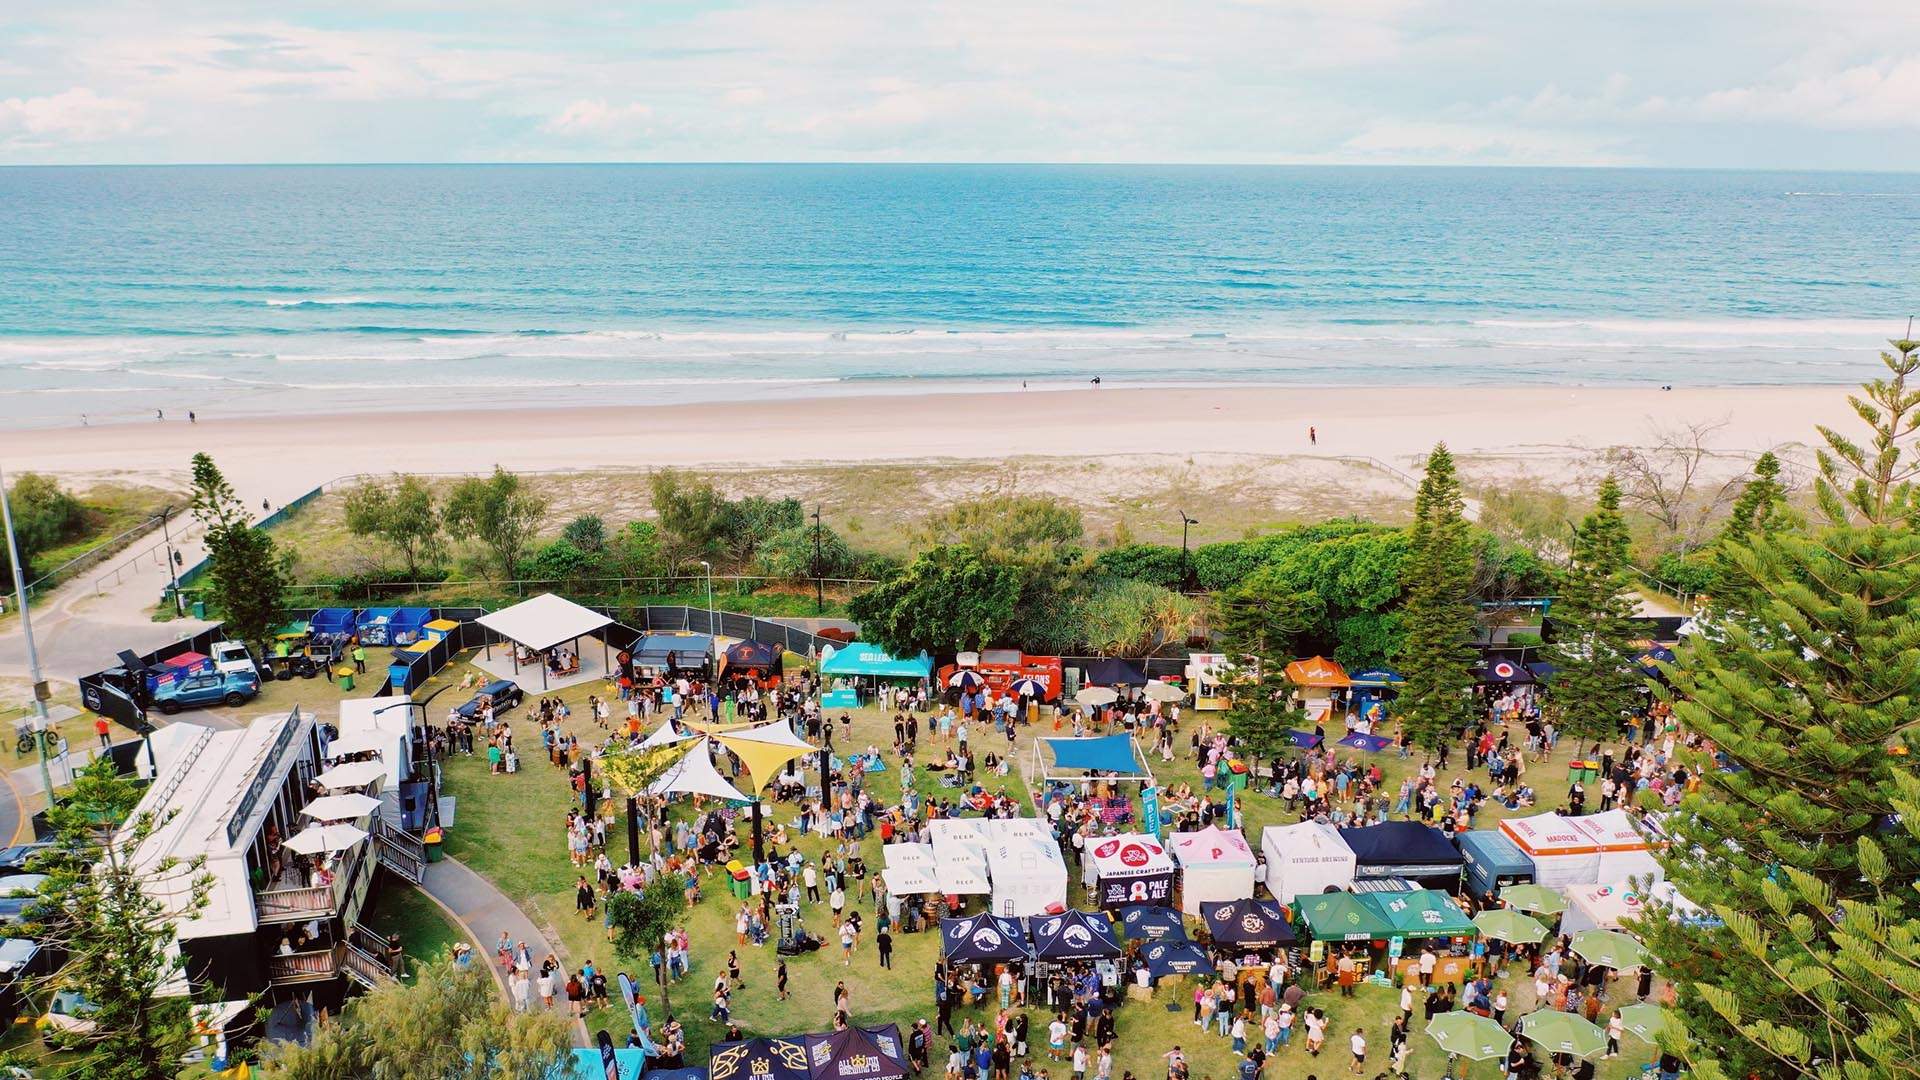 Broadbeach's Two-Day Beachside Crafted Beer Festival Returns This Spring with 400-Plus Brews